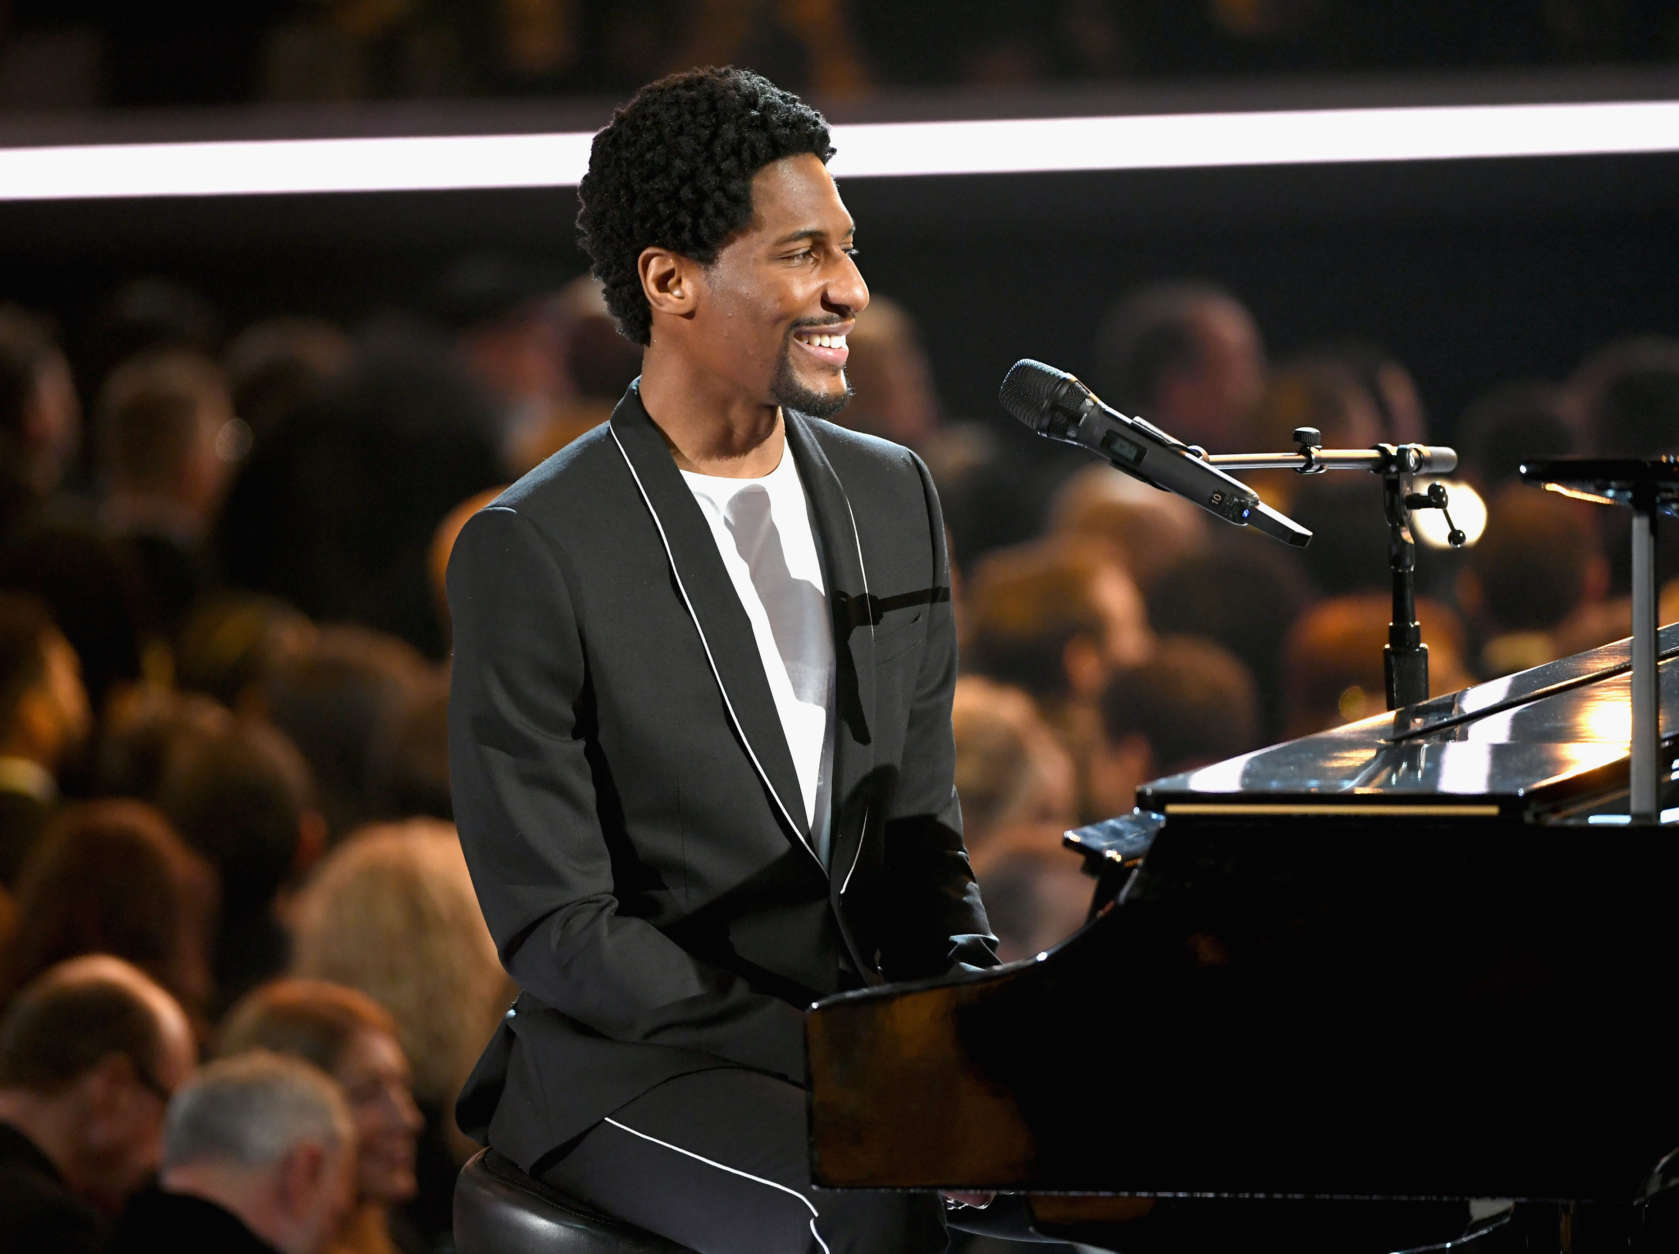 NEW YORK, NY - JANUARY 28:  Recording artist Jon Batiste performs onstage during the 60th Annual GRAMMY Awards at Madison Square Garden on January 28, 2018 in New York City.  (Photo by Kevin Winter/Getty Images for NARAS)